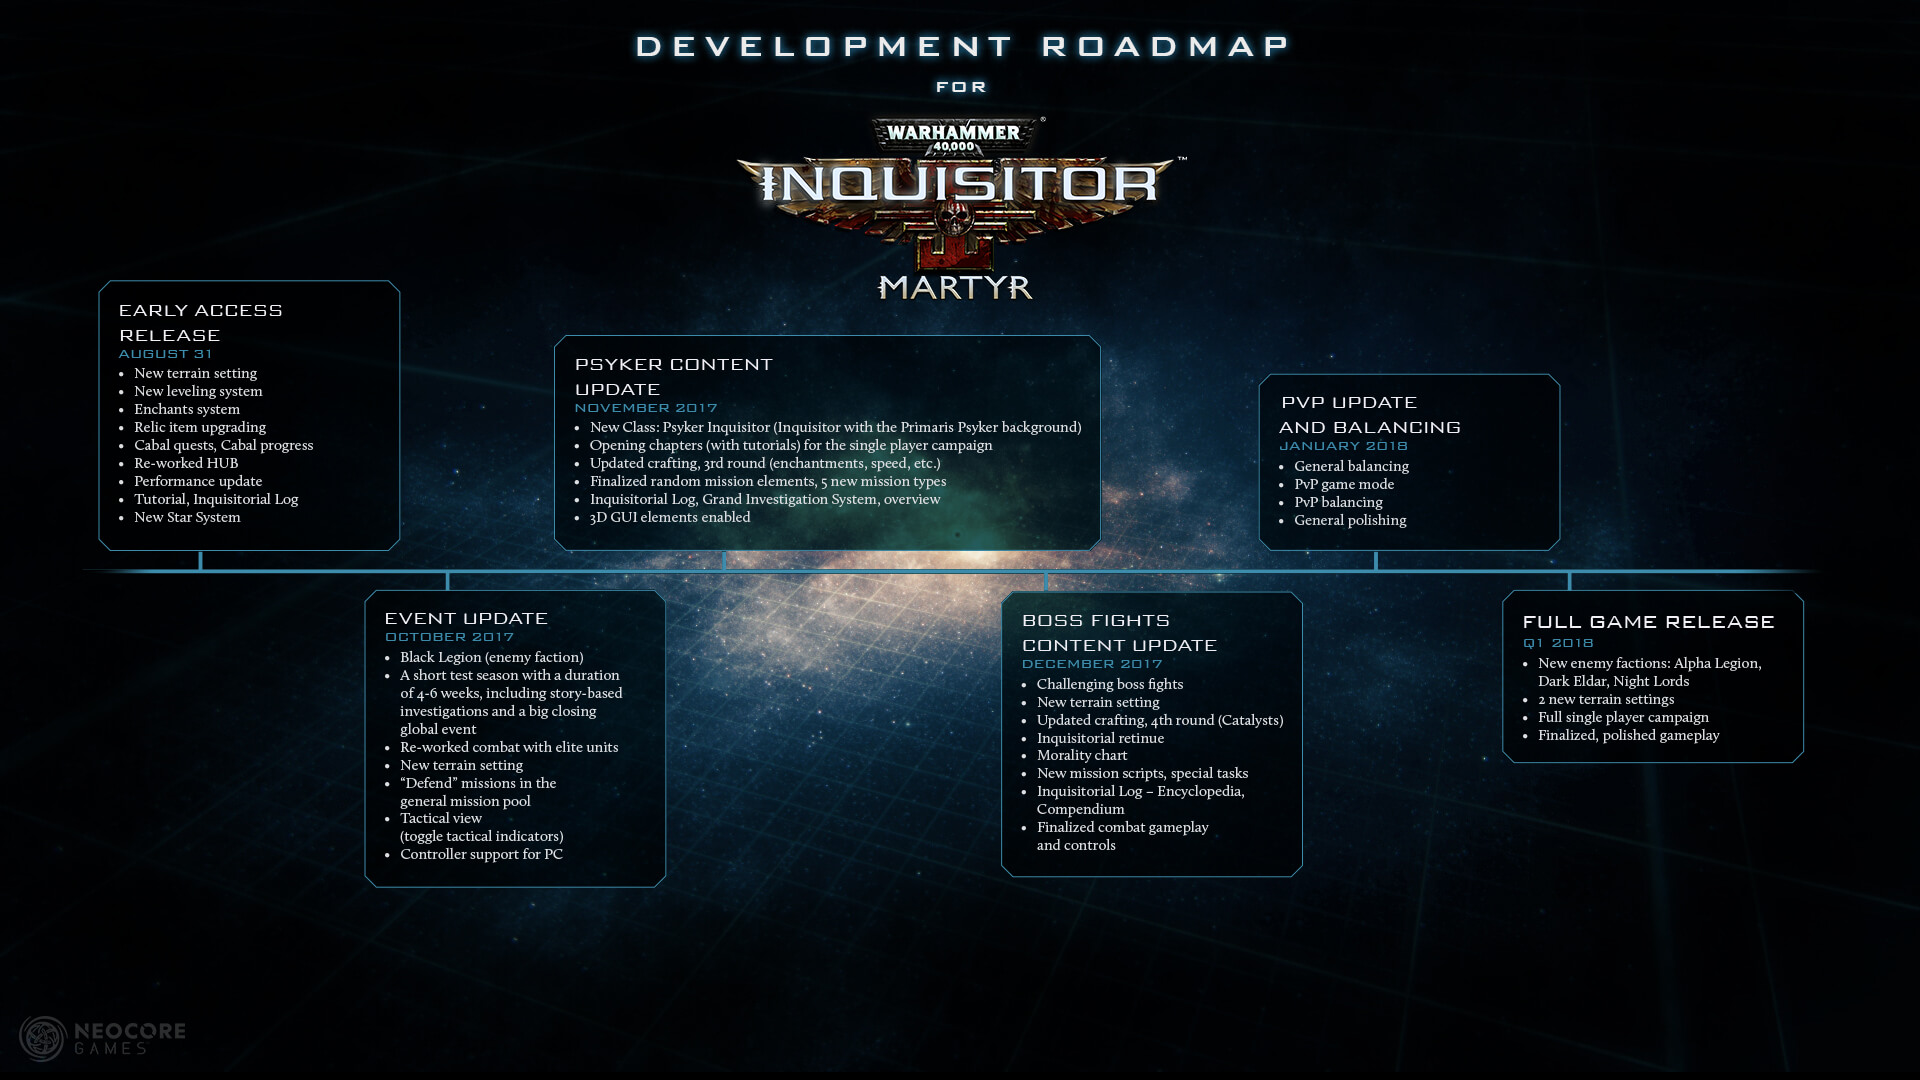 Warhammer 40,000 Inquisitor Martyr road map